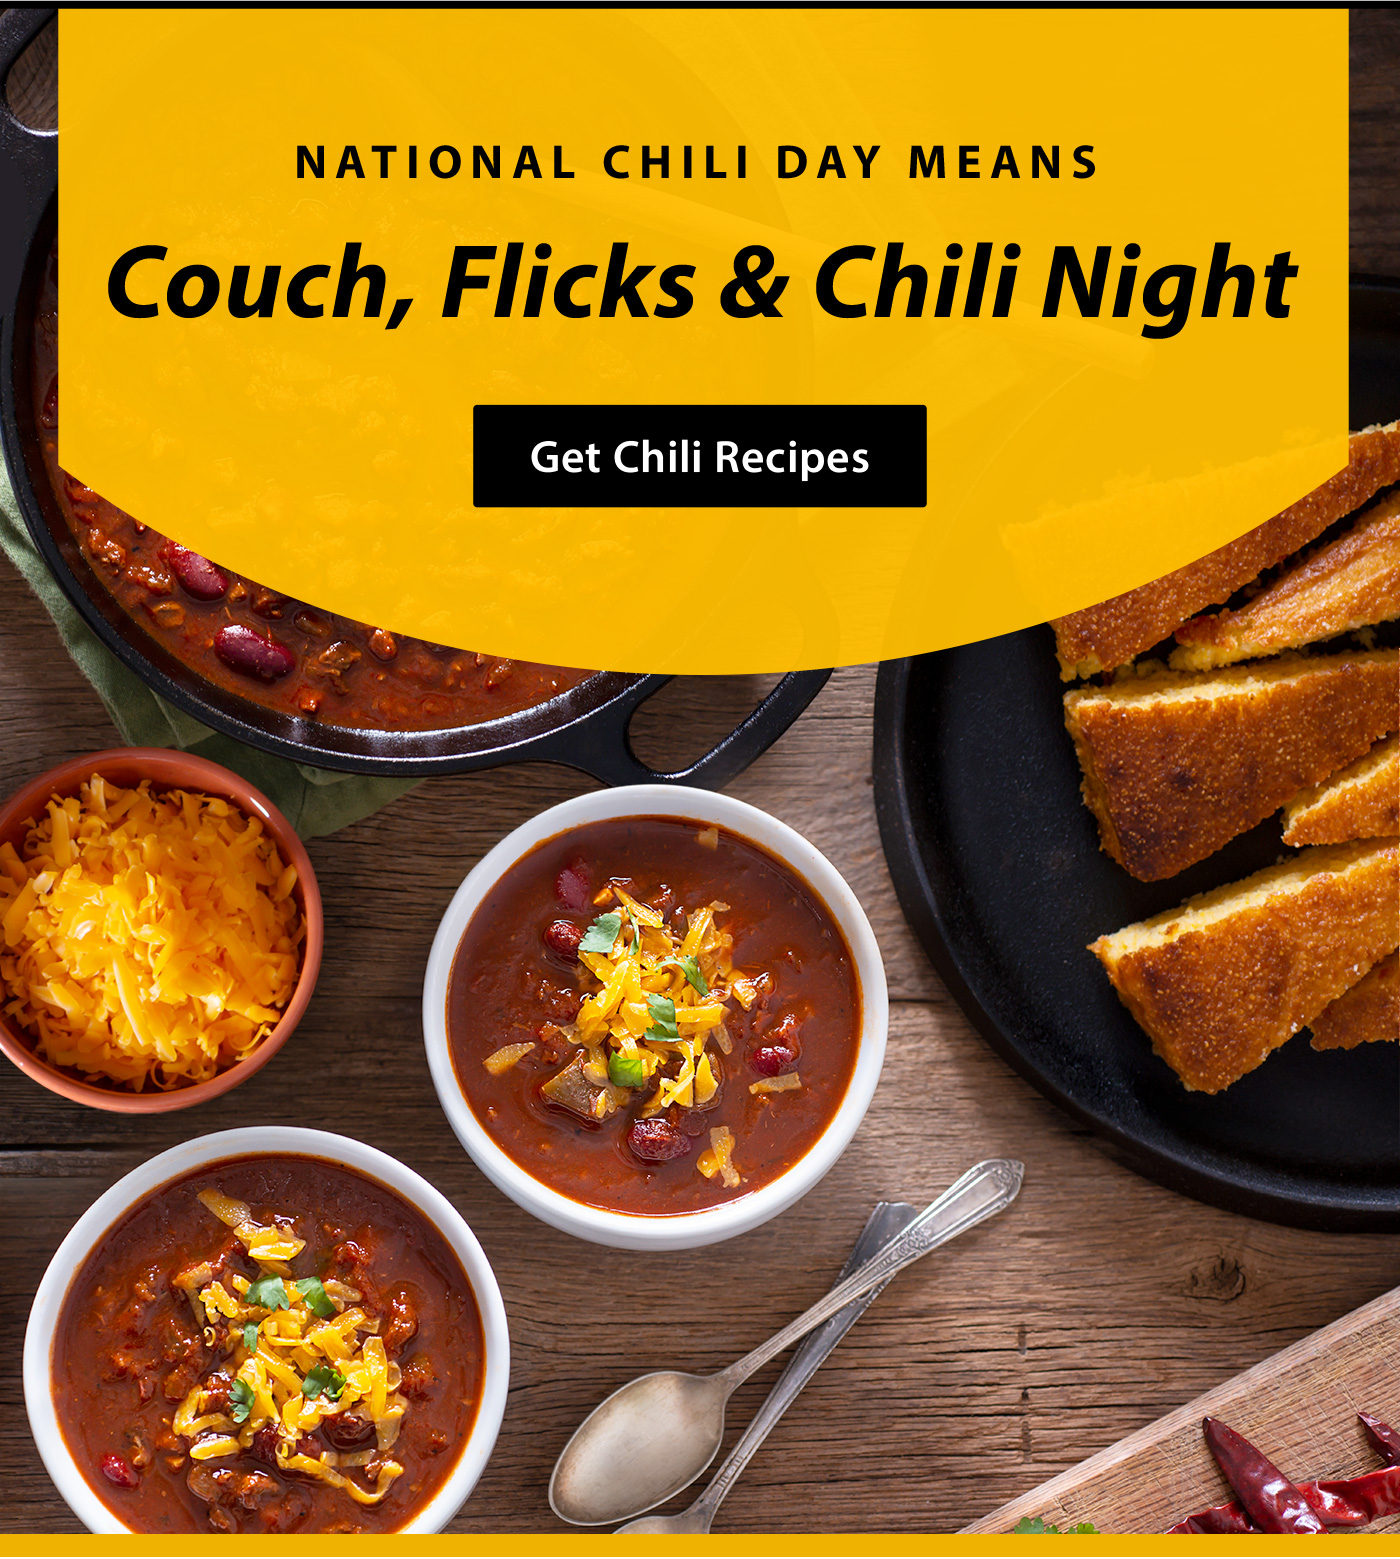 National Chili Day Means Couch, Flicks & Chili Night. Get Chili Recipes